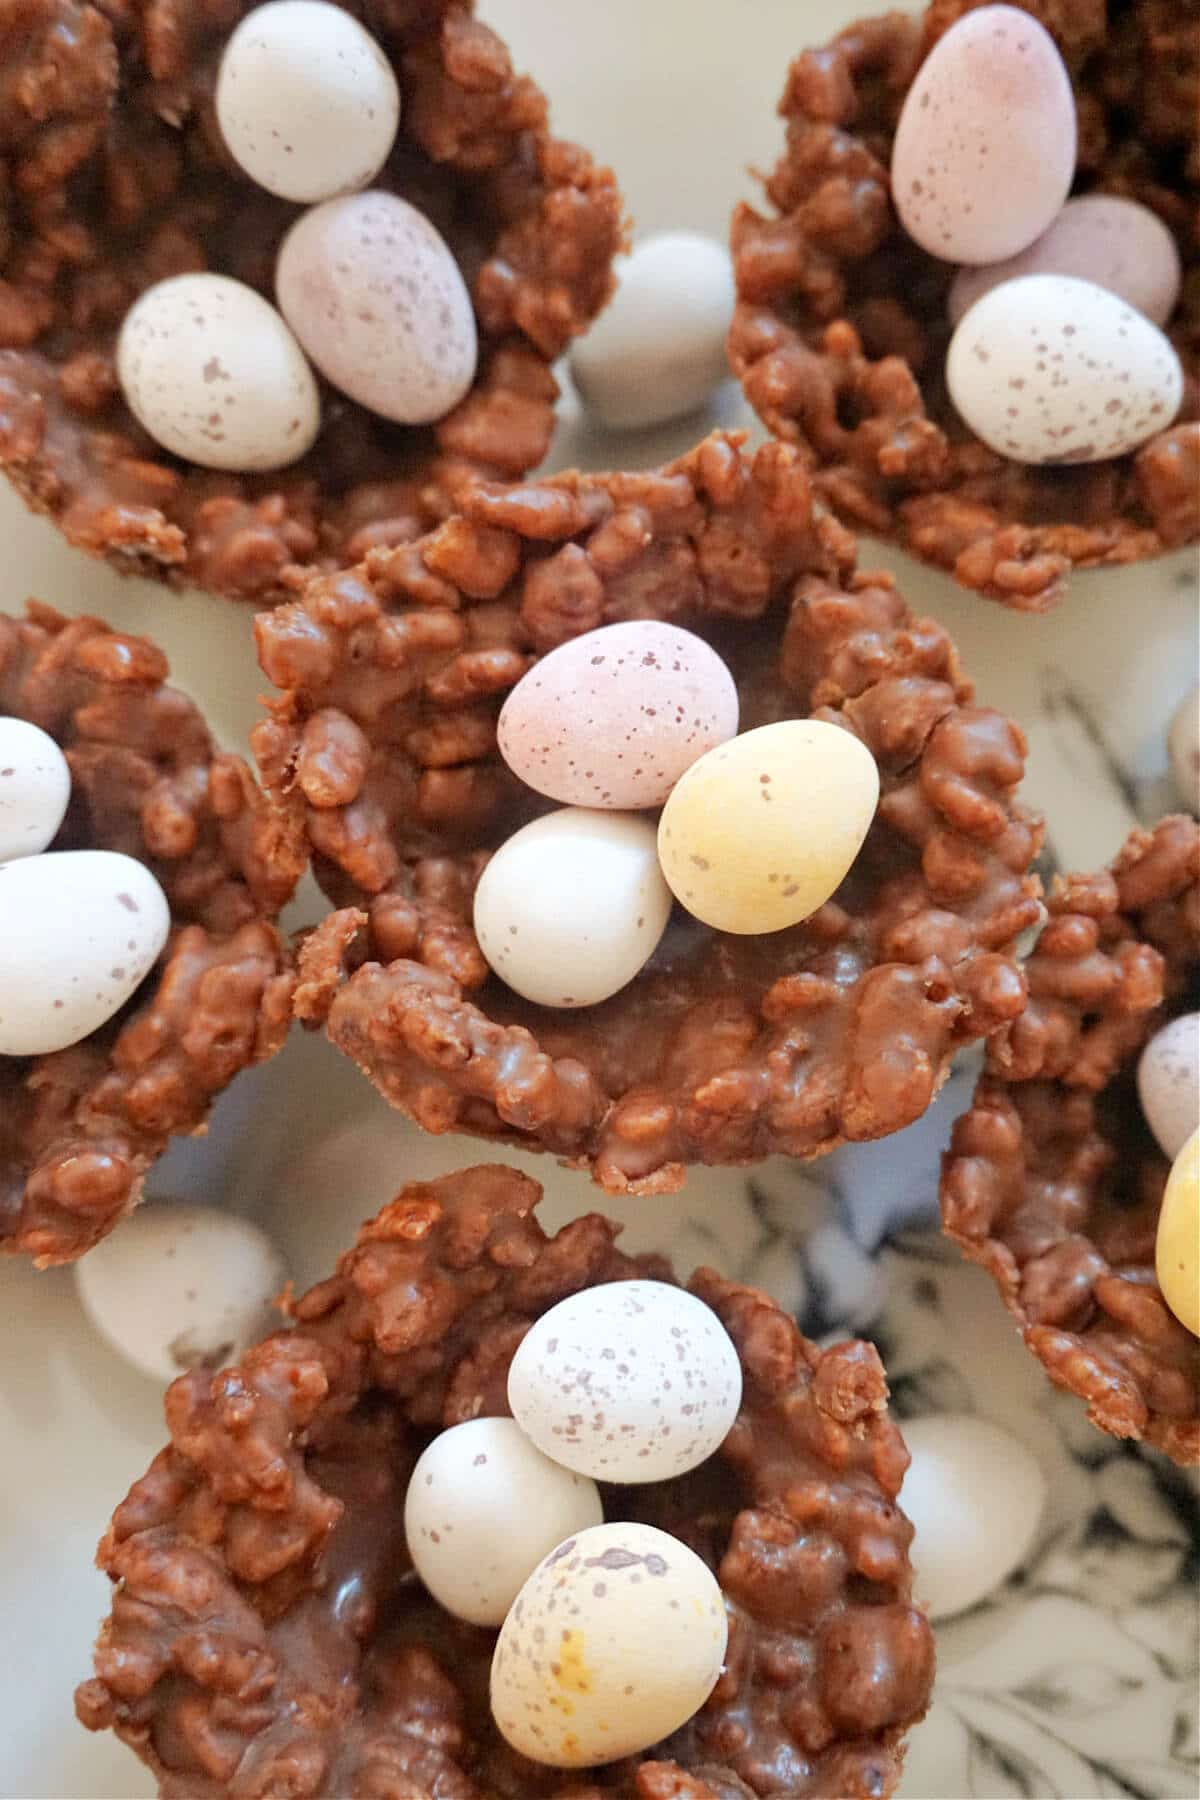 Overheas shot of 6 chocolate rice krispie nests filled with 3 mini chocolate eggs each